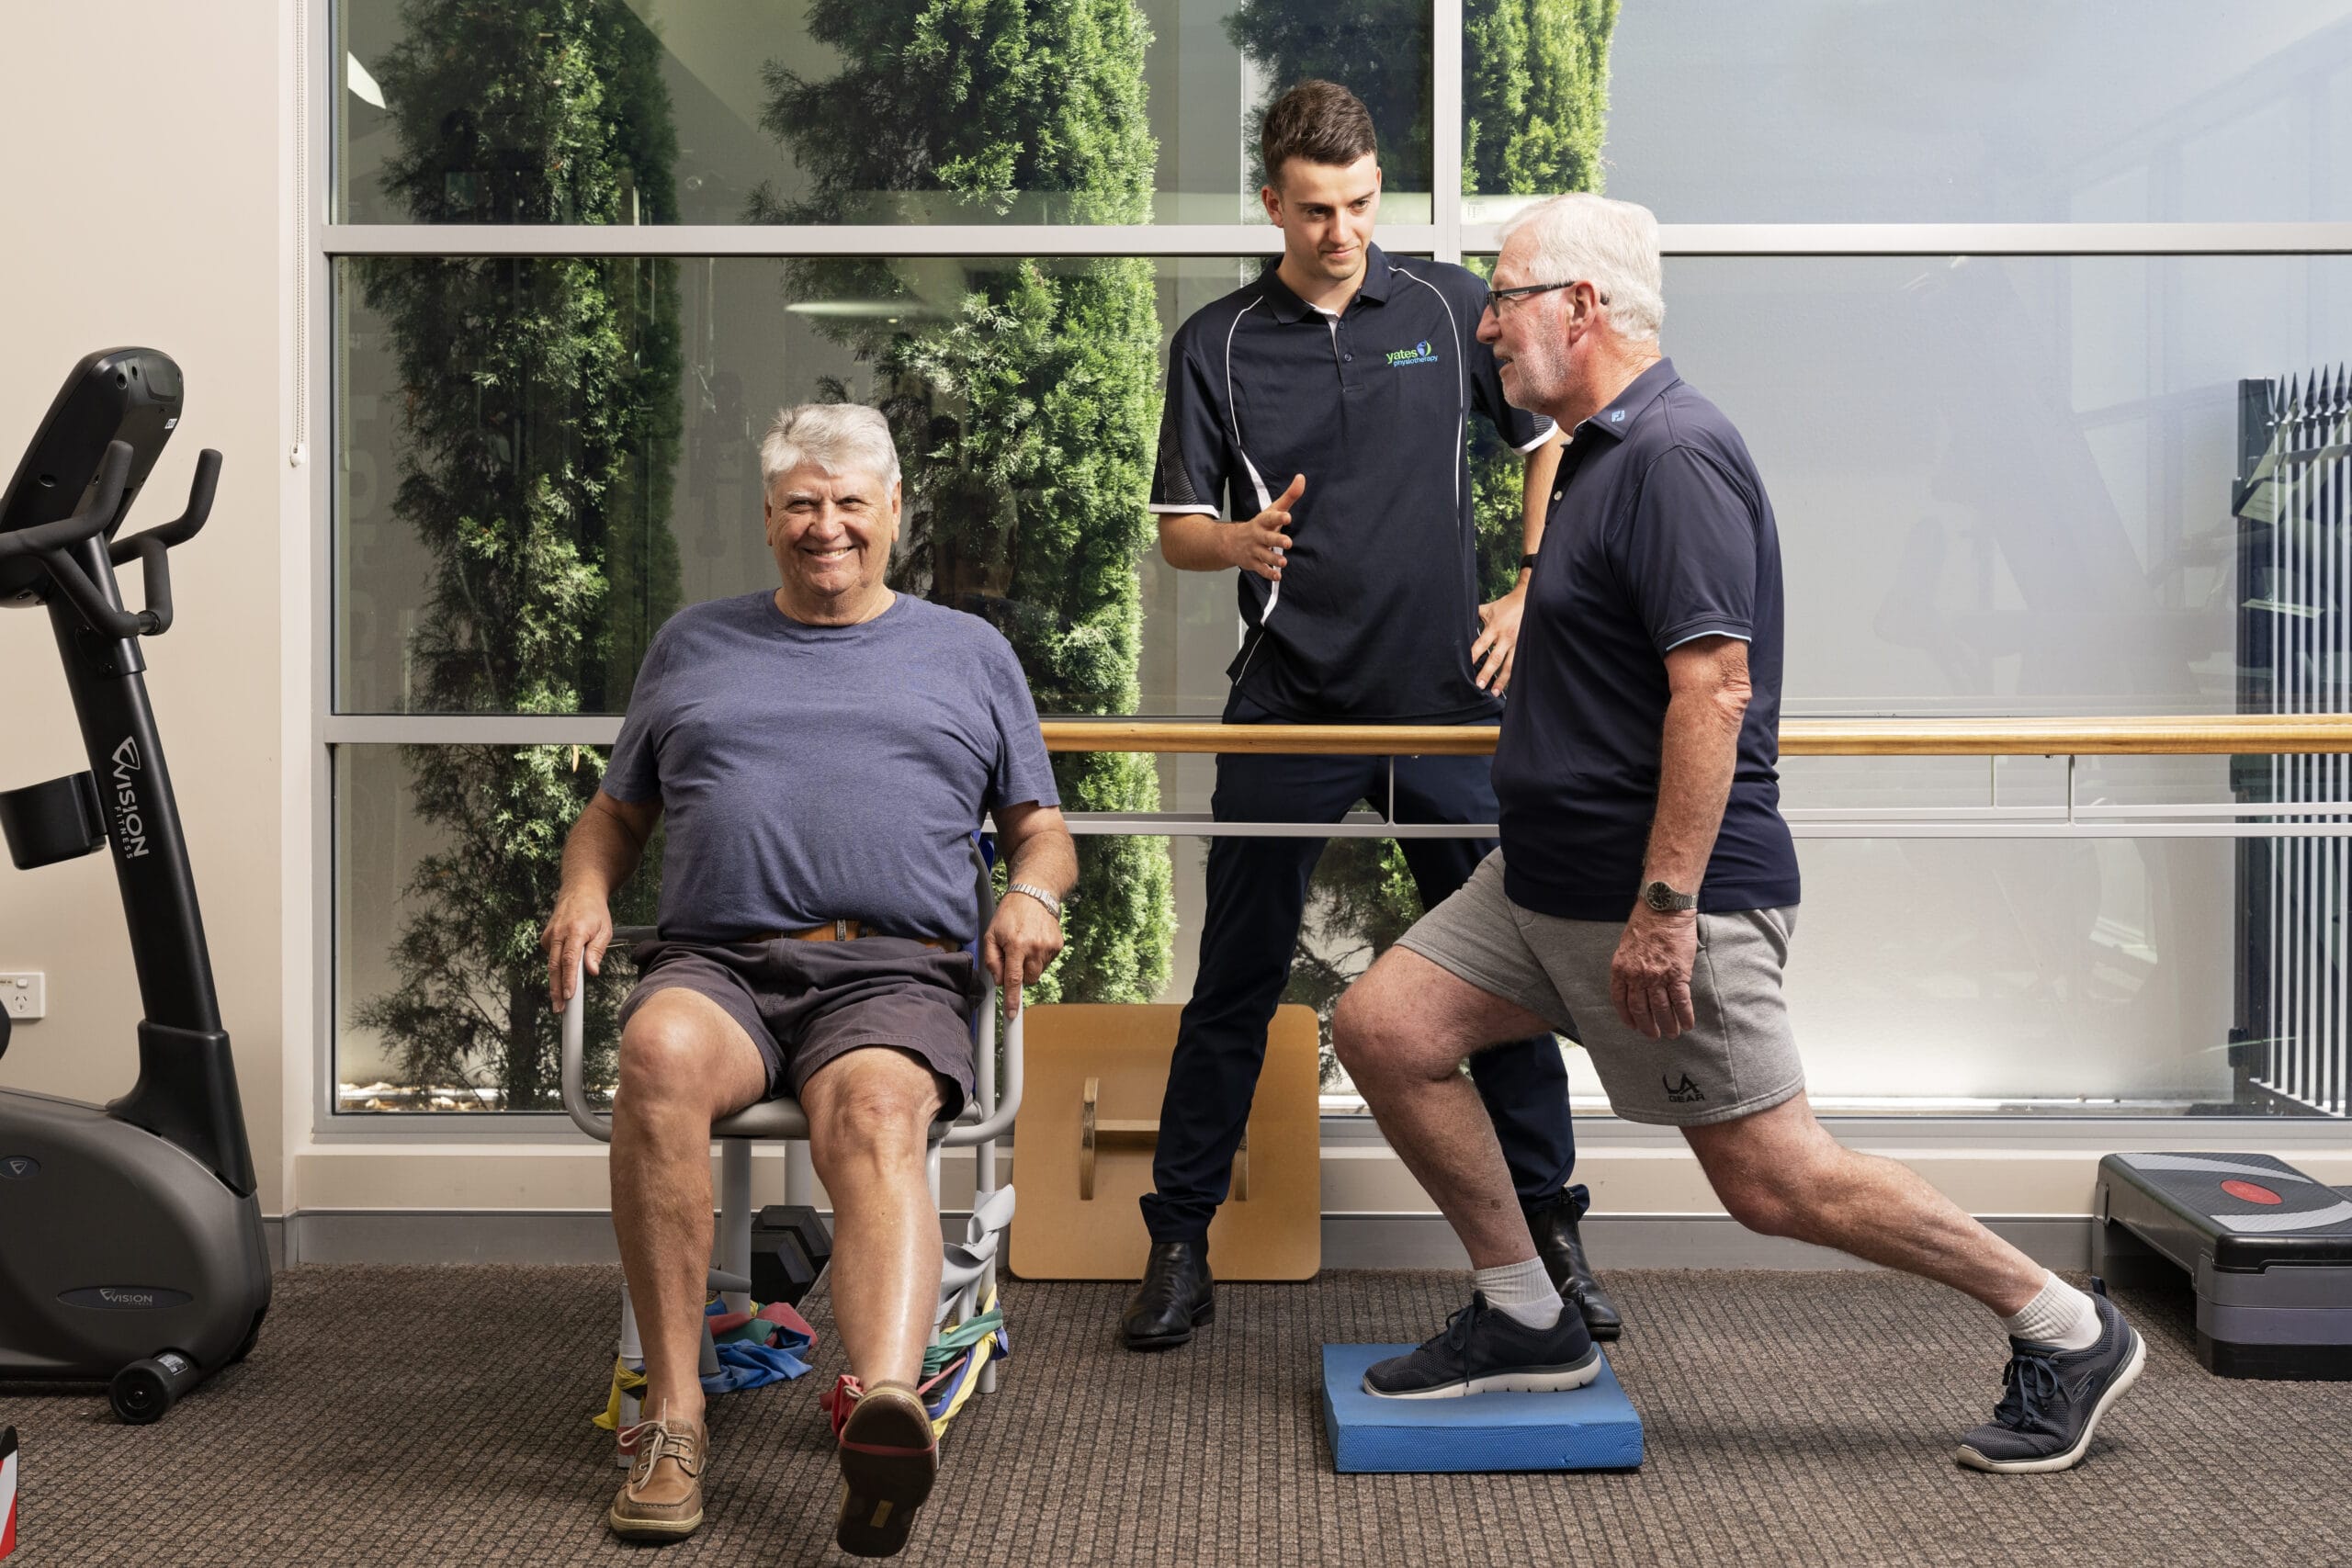 A group of participants engaged in a GLA:D exercise session led by a physiotherapist at Yates Physiotherapy, Adelaide